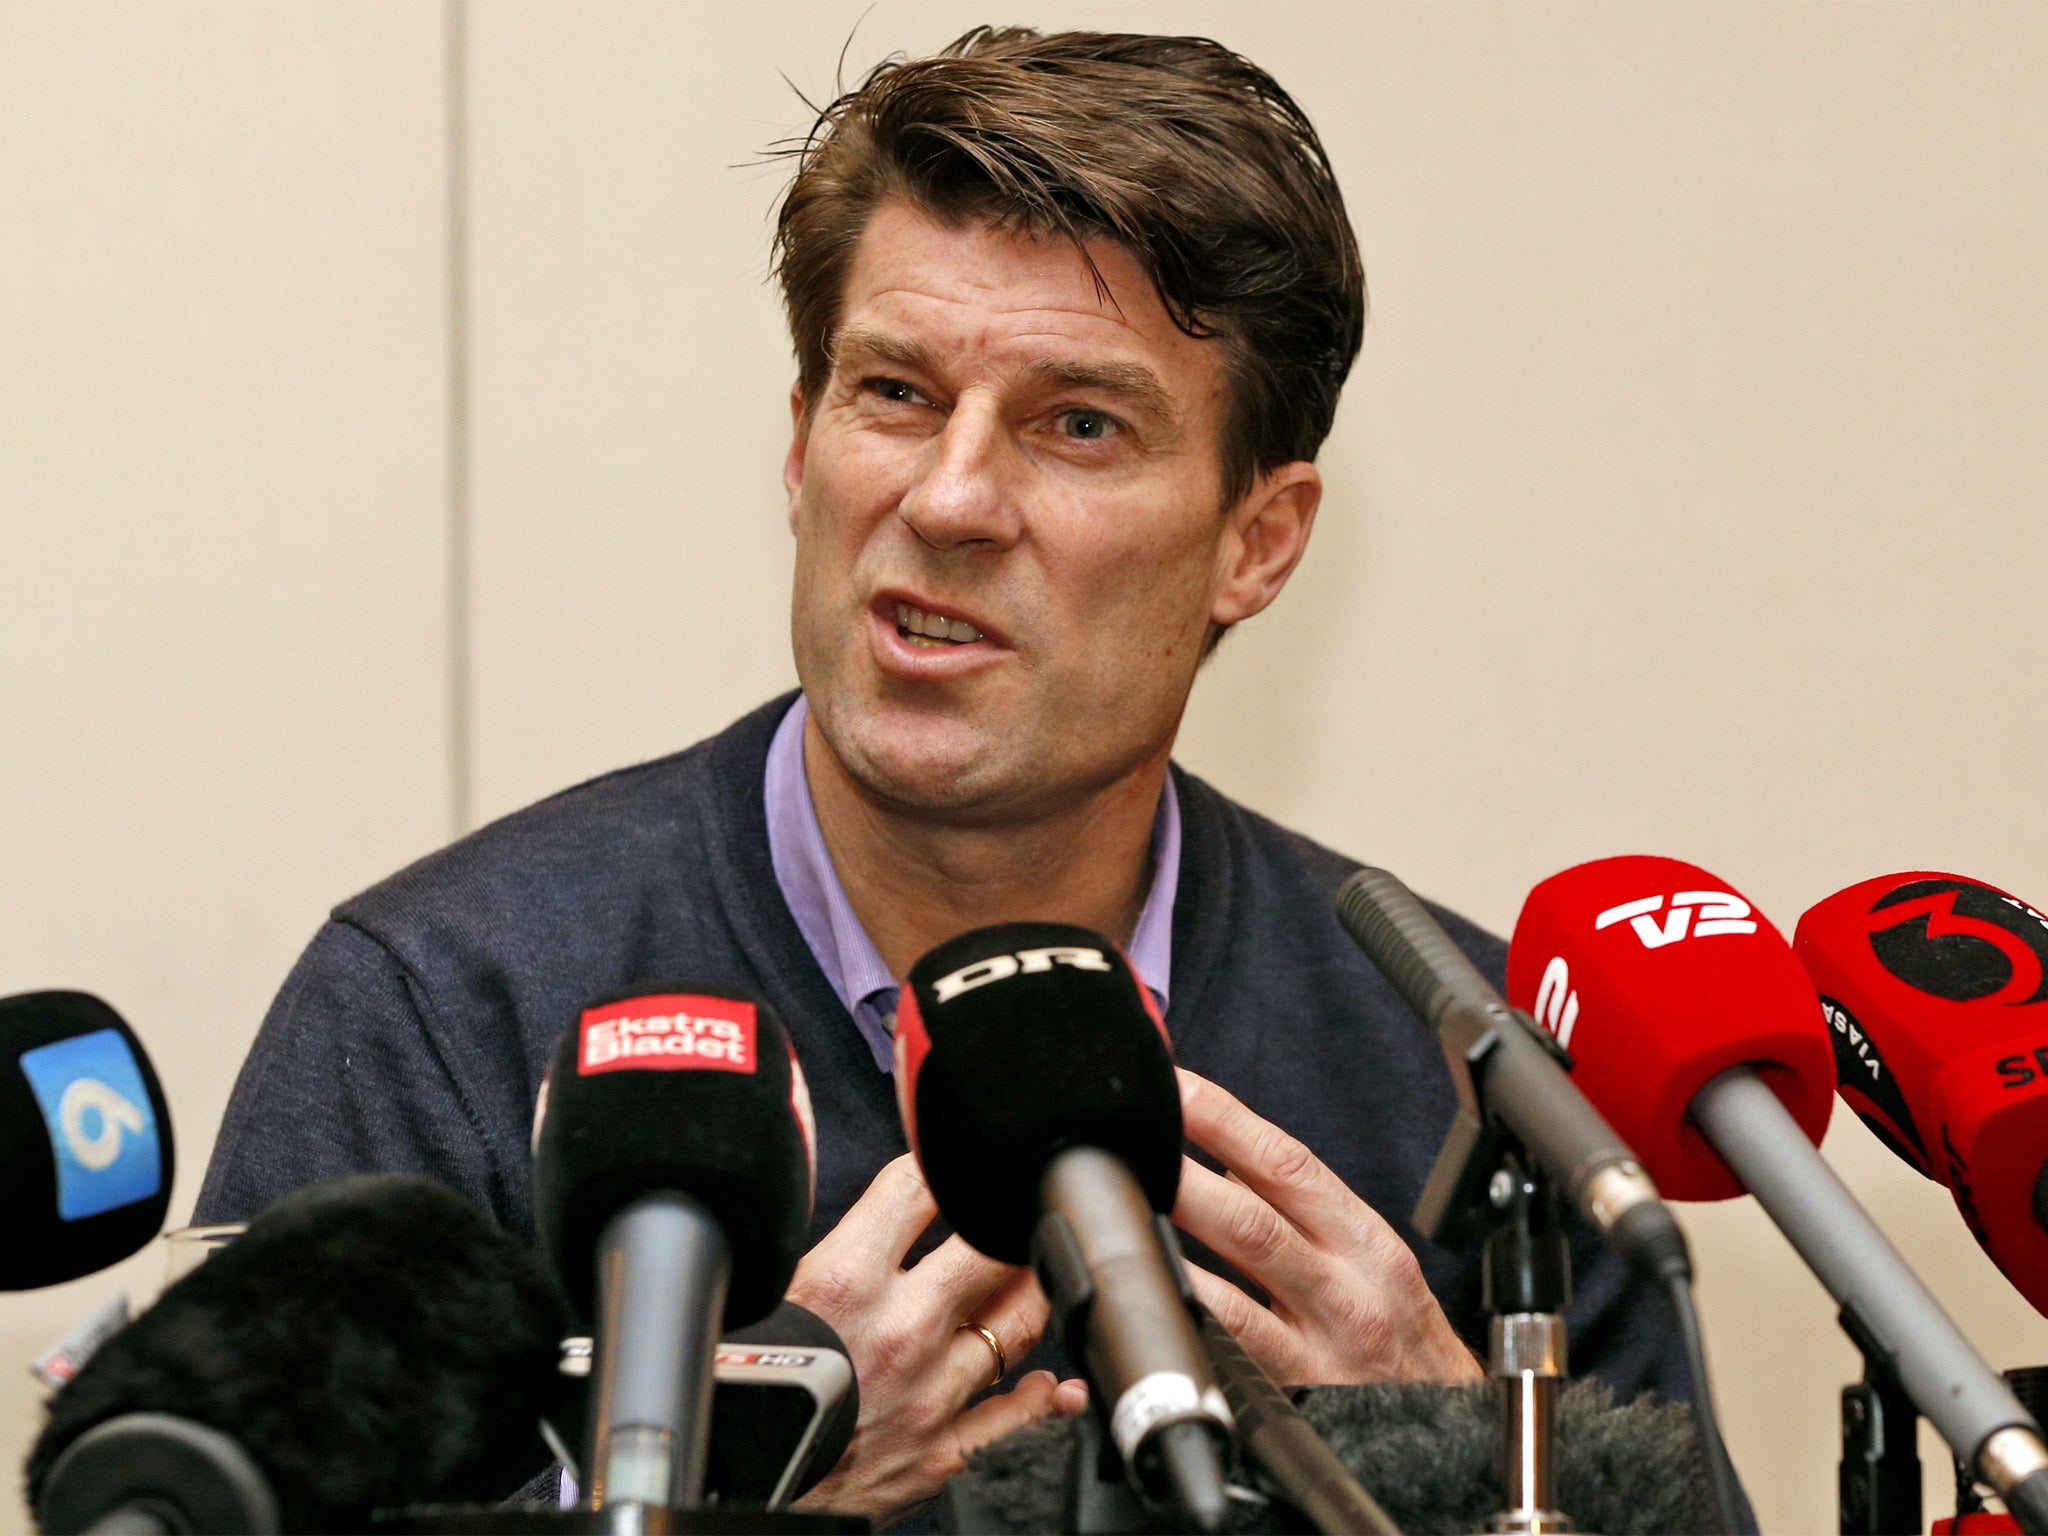 Michael Laudrup claims his dismissal came six hours after his future at the club was confirmed